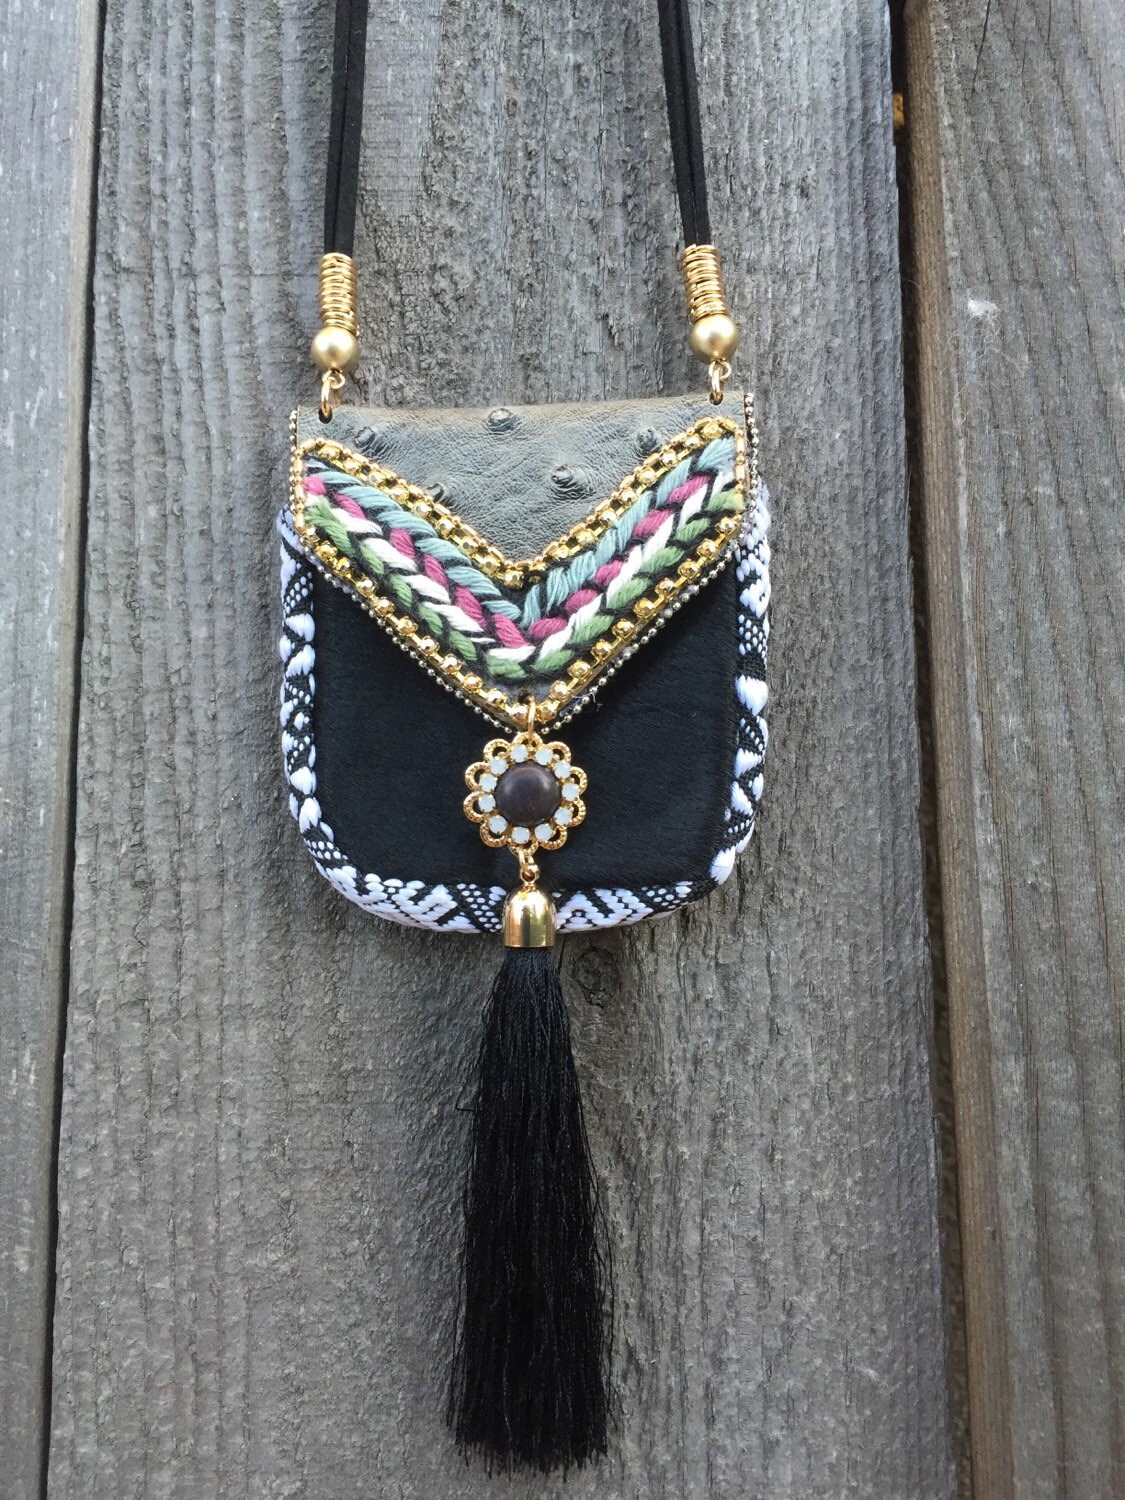 Medicine Bag Necklace Bohemian Jewelry by GypsyTribeJewels on Etsy